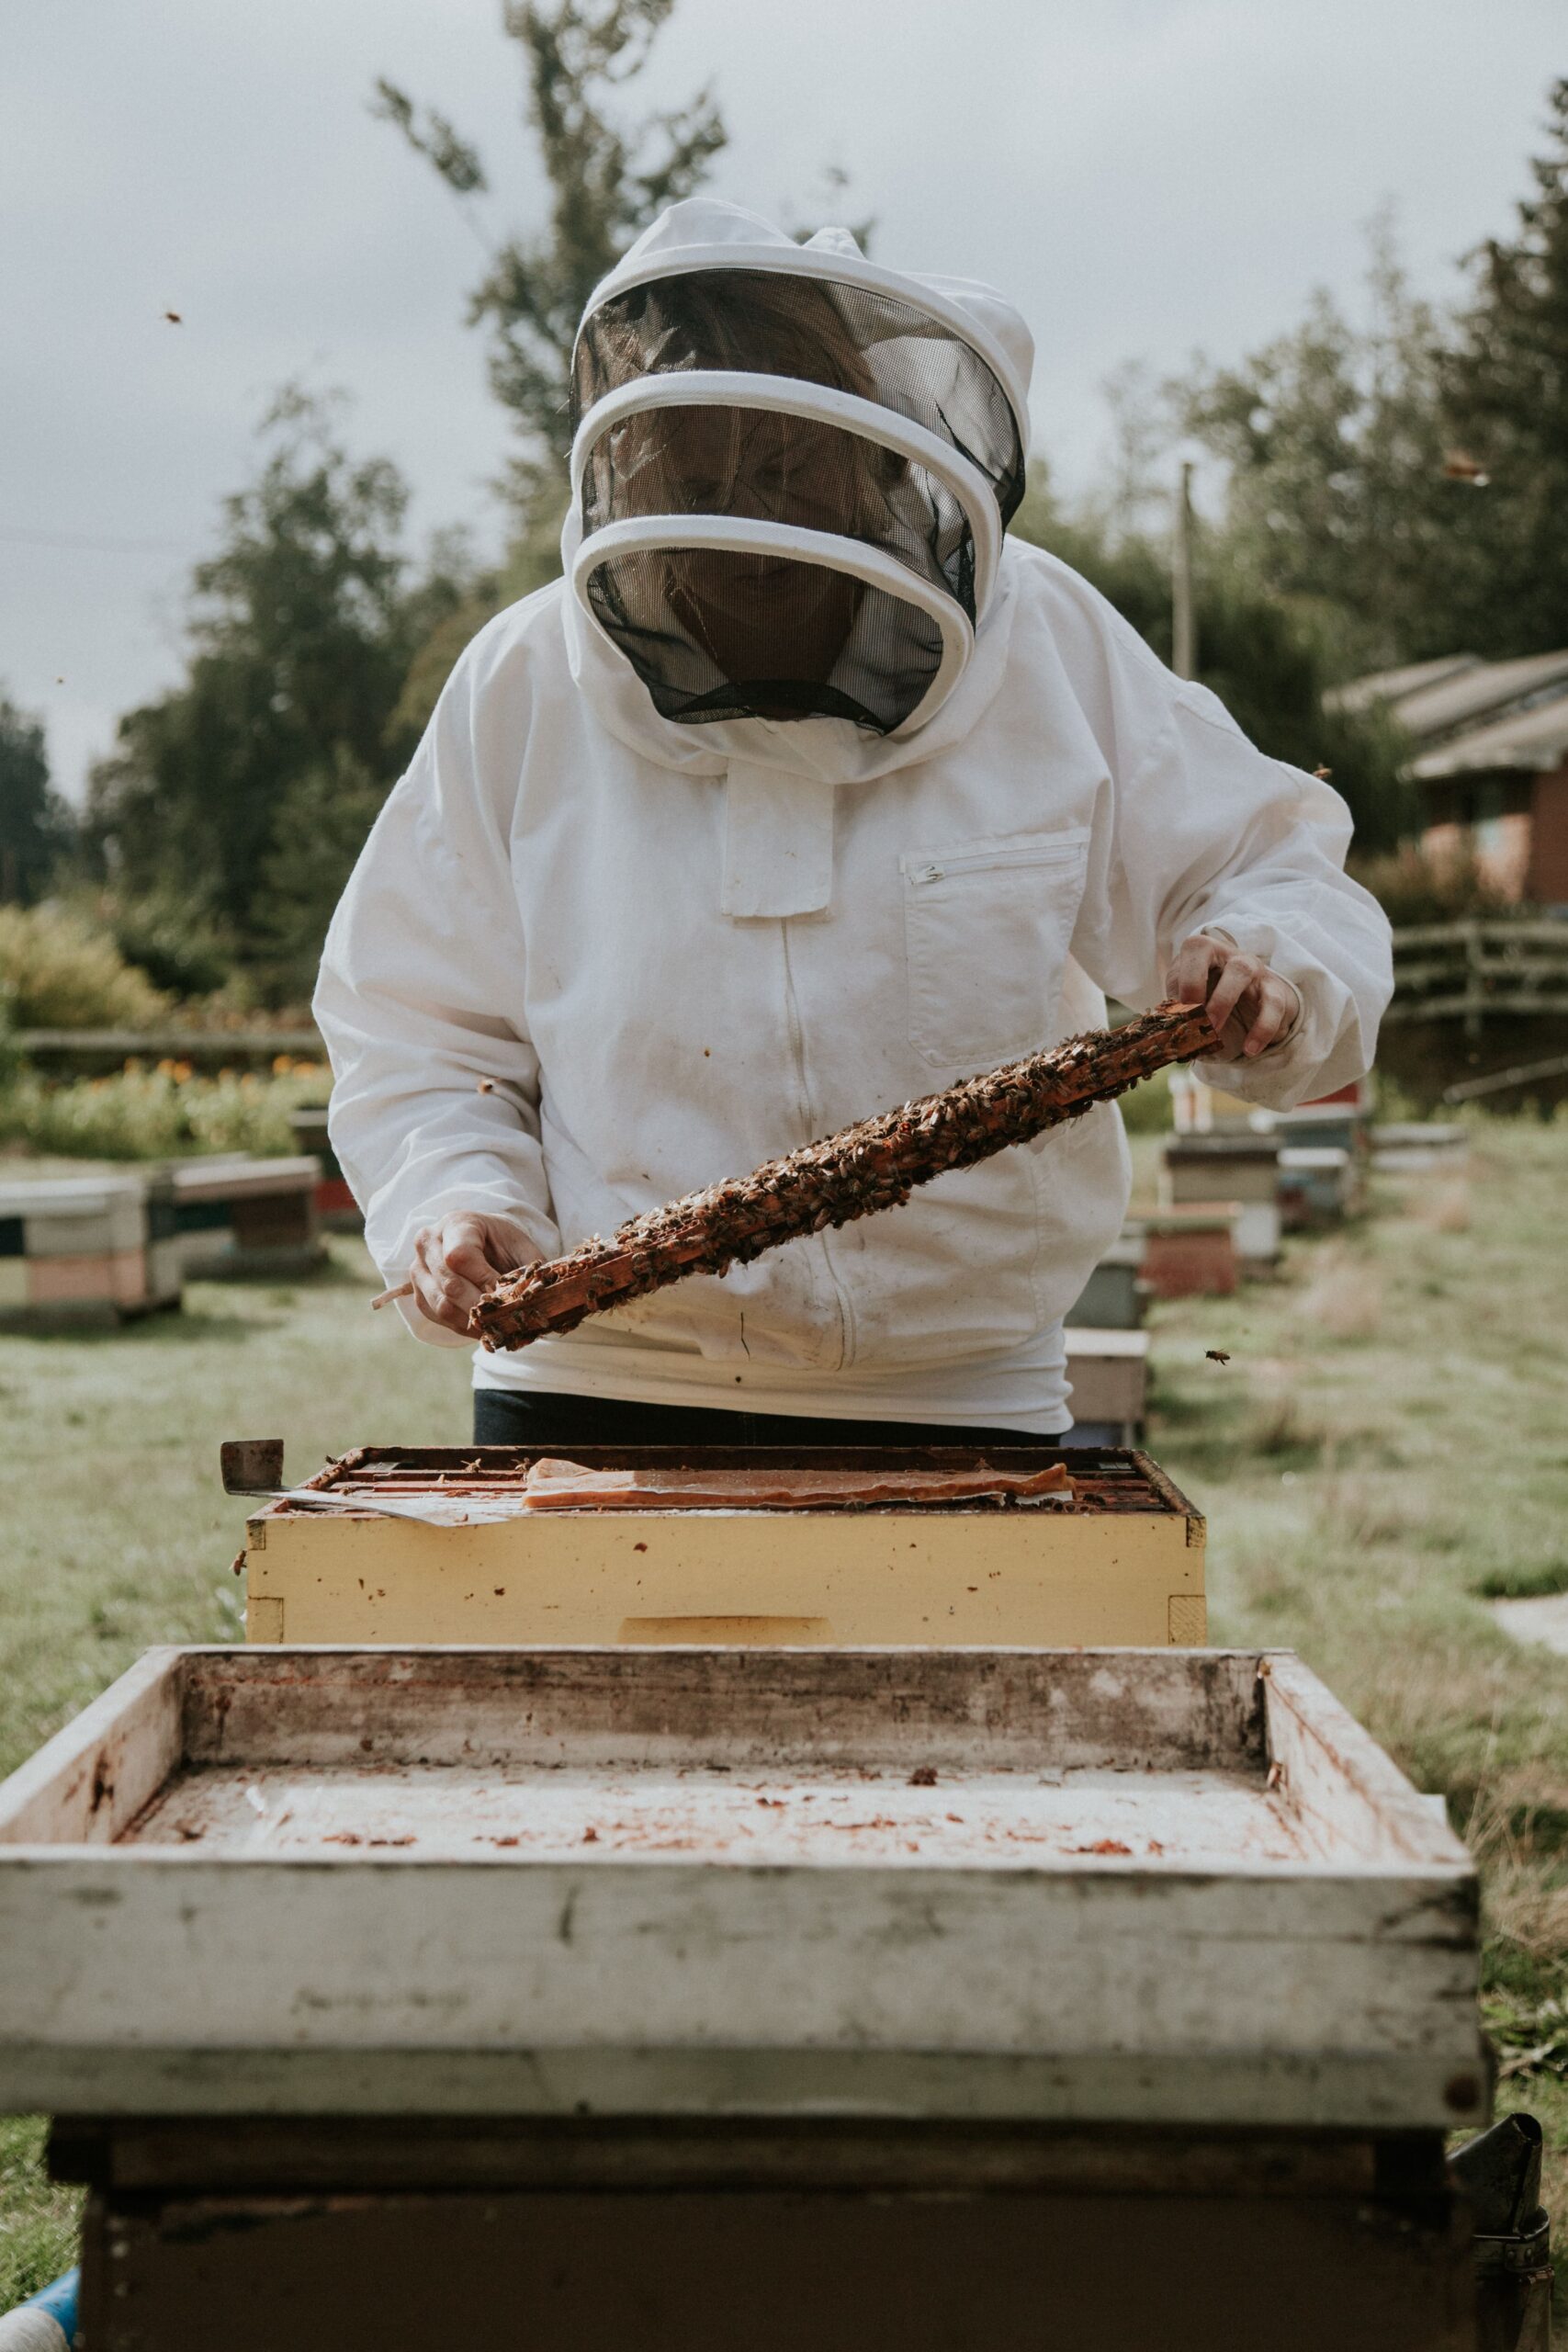 A beekeeper in protective gear holding a panel.